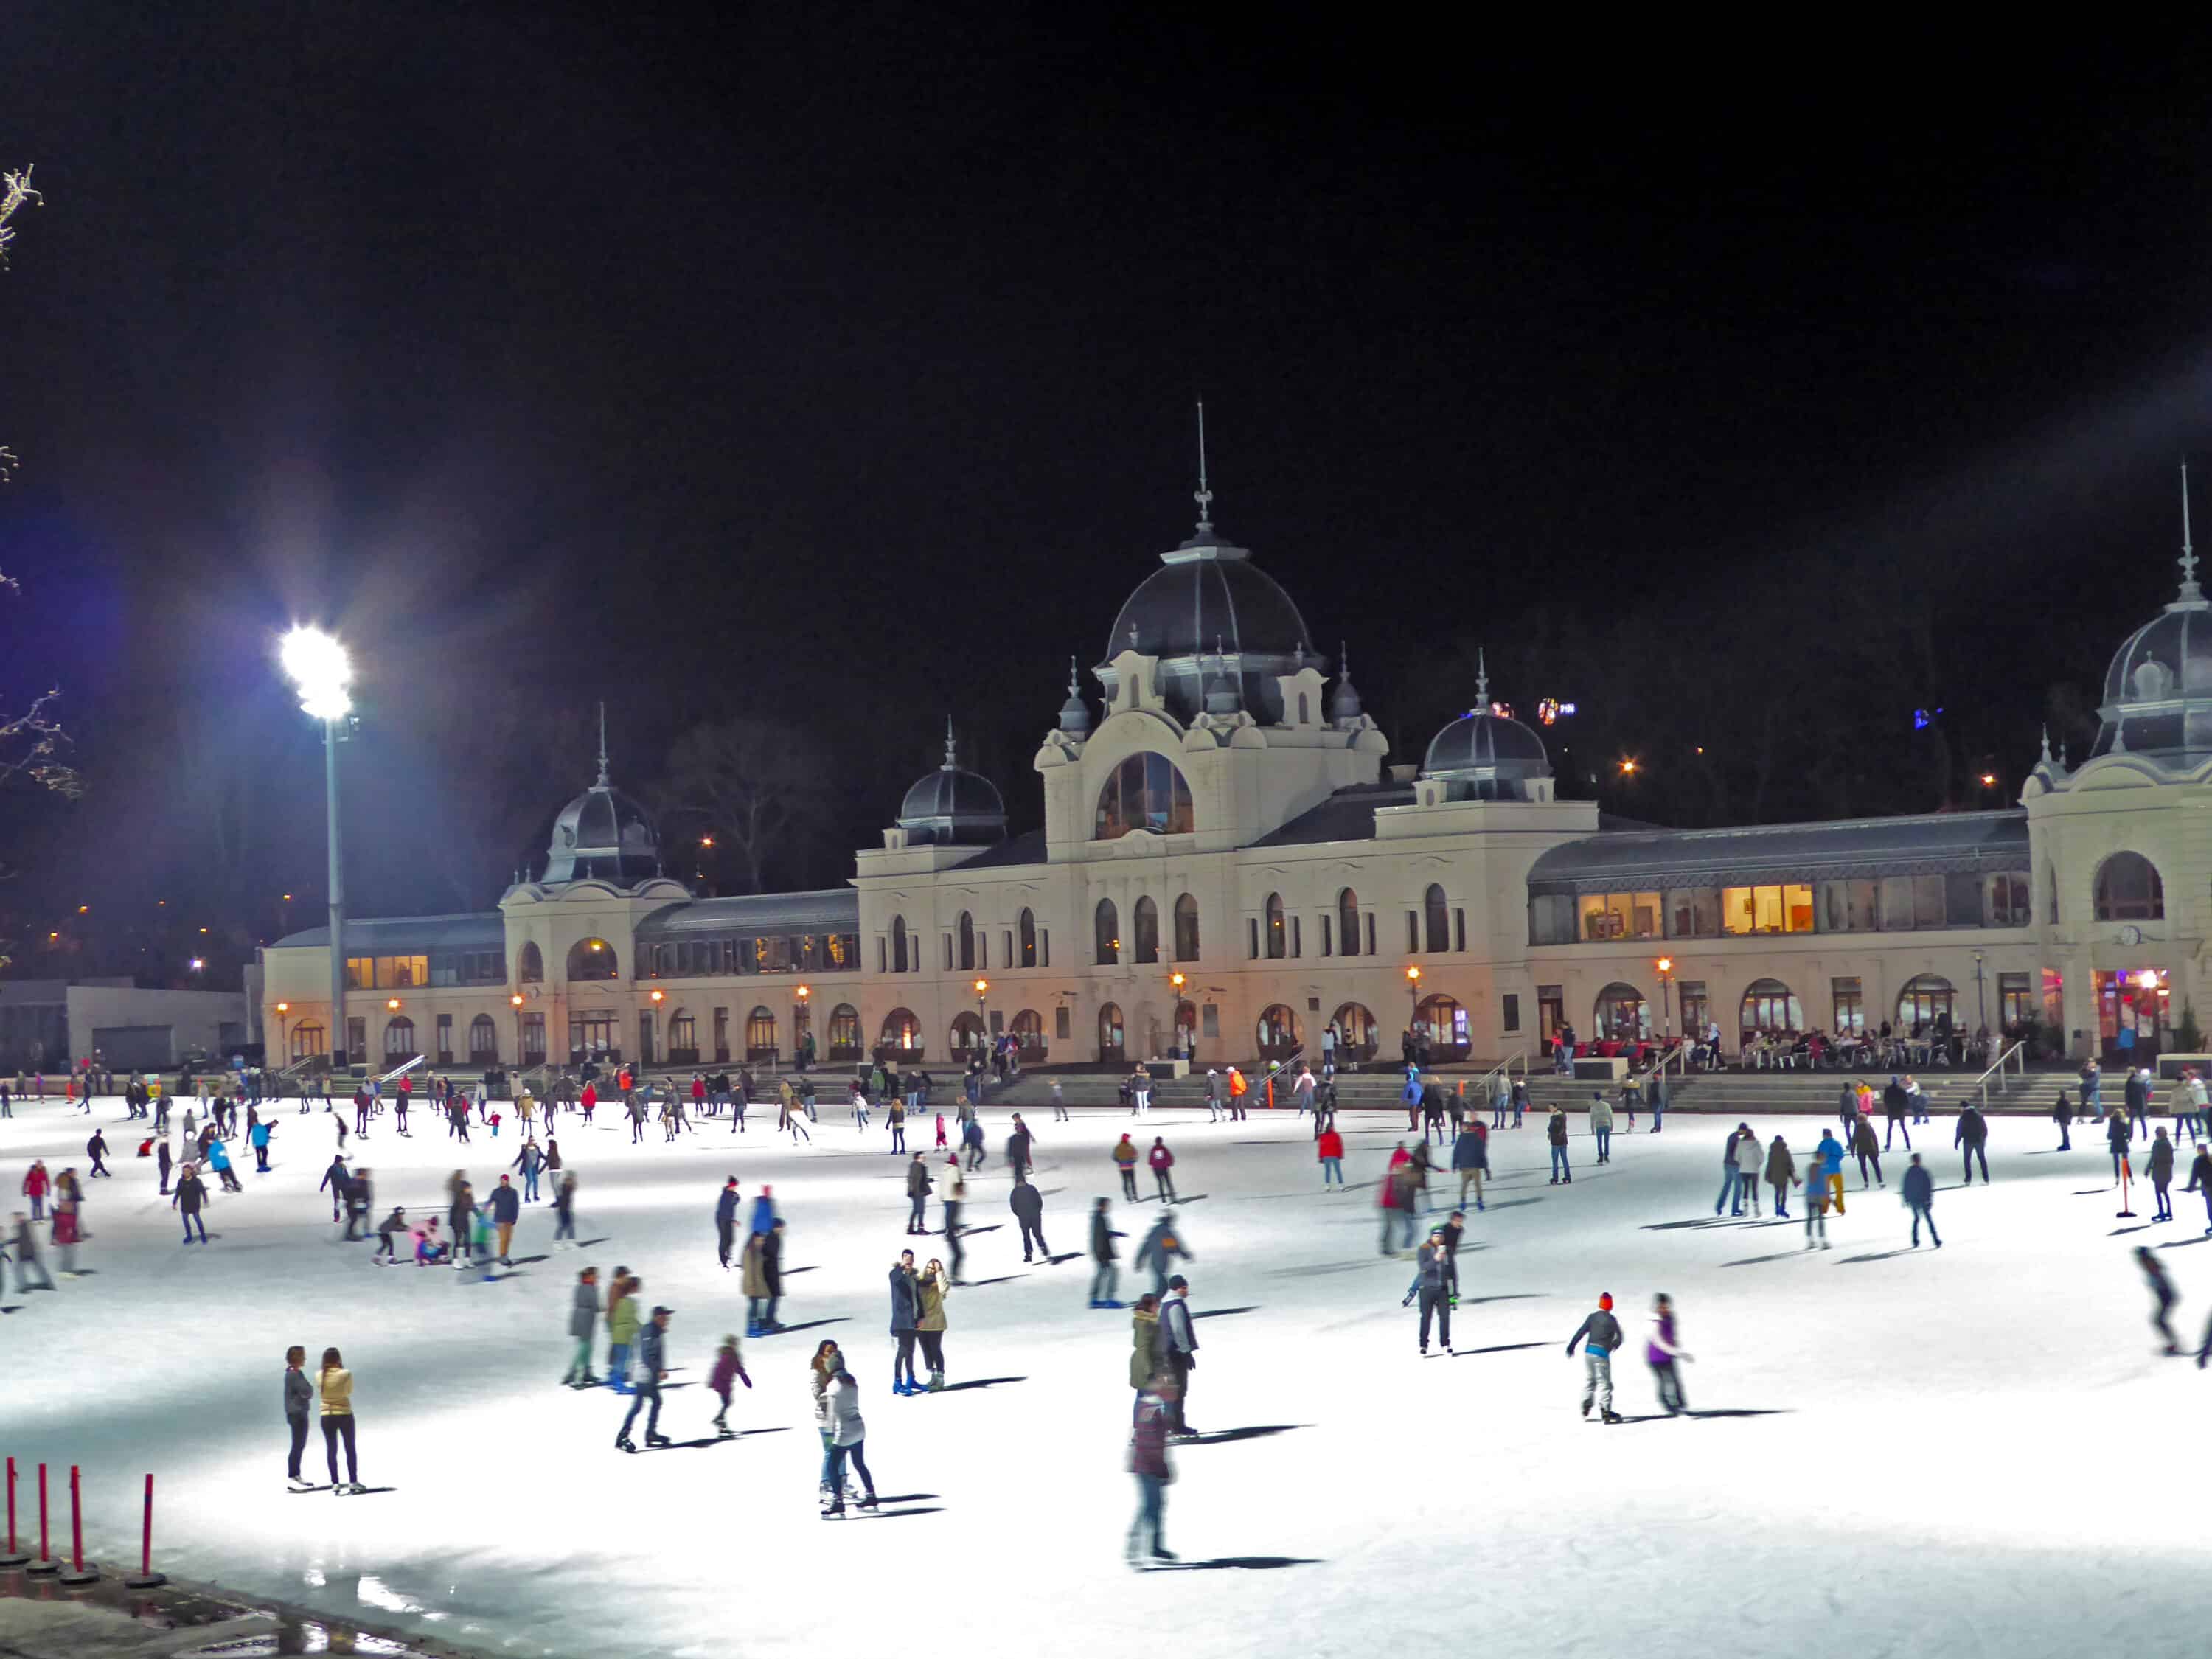 People ice skating at night at the City Park Ice Rink in Budapest, Hungary.